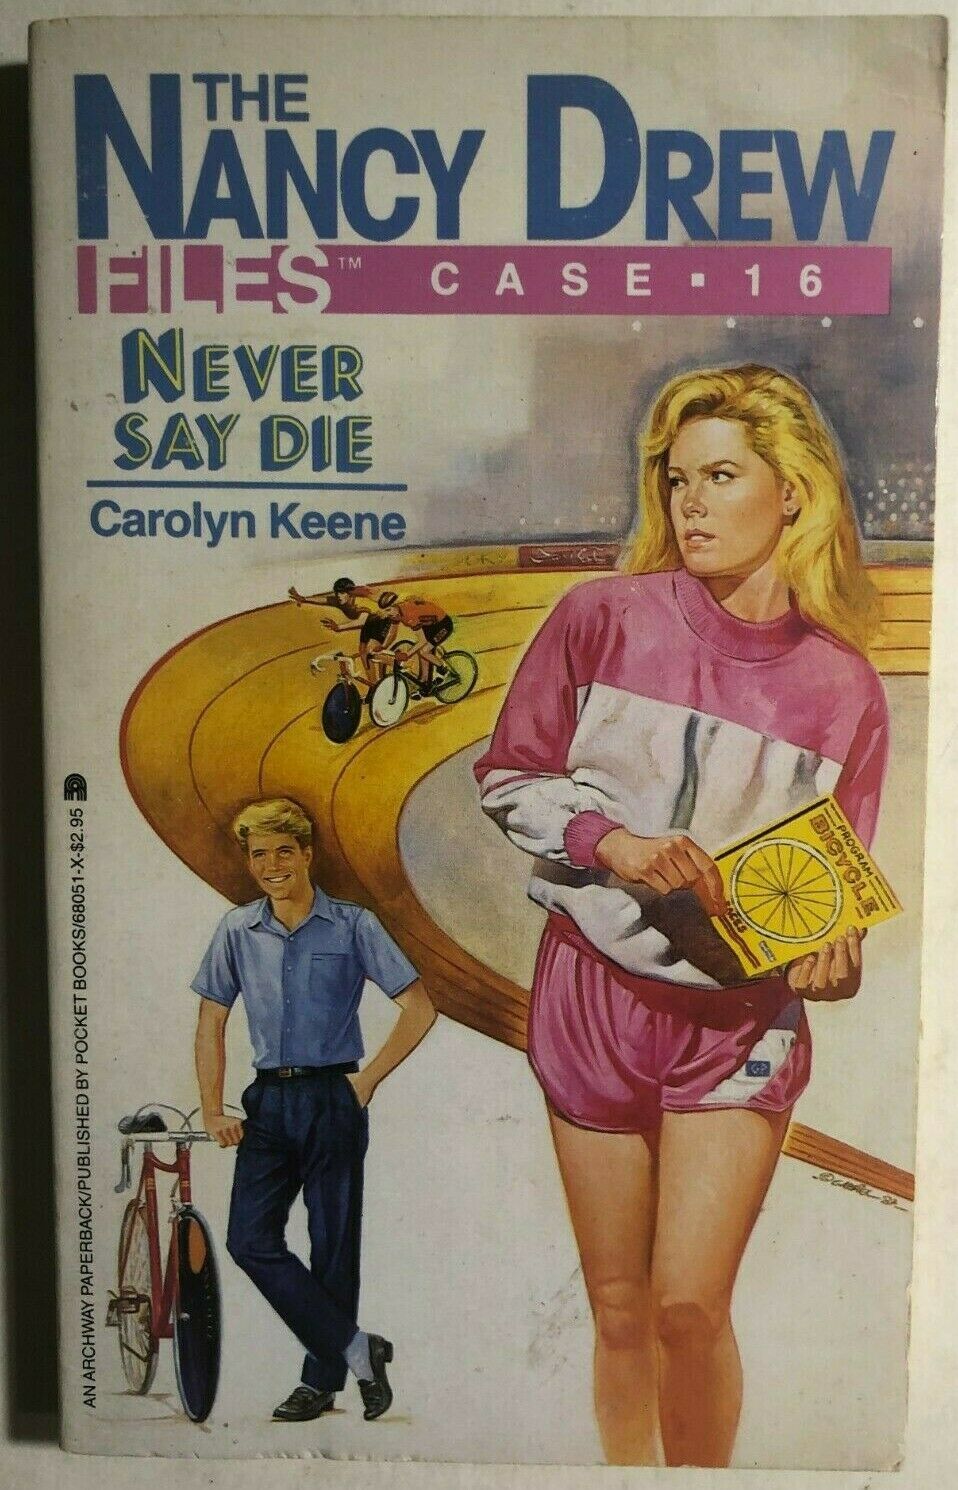 Primary image for NANCY DREW FILES Case #16 Never Say Die by Carolyn Keene (1987) Archway pb